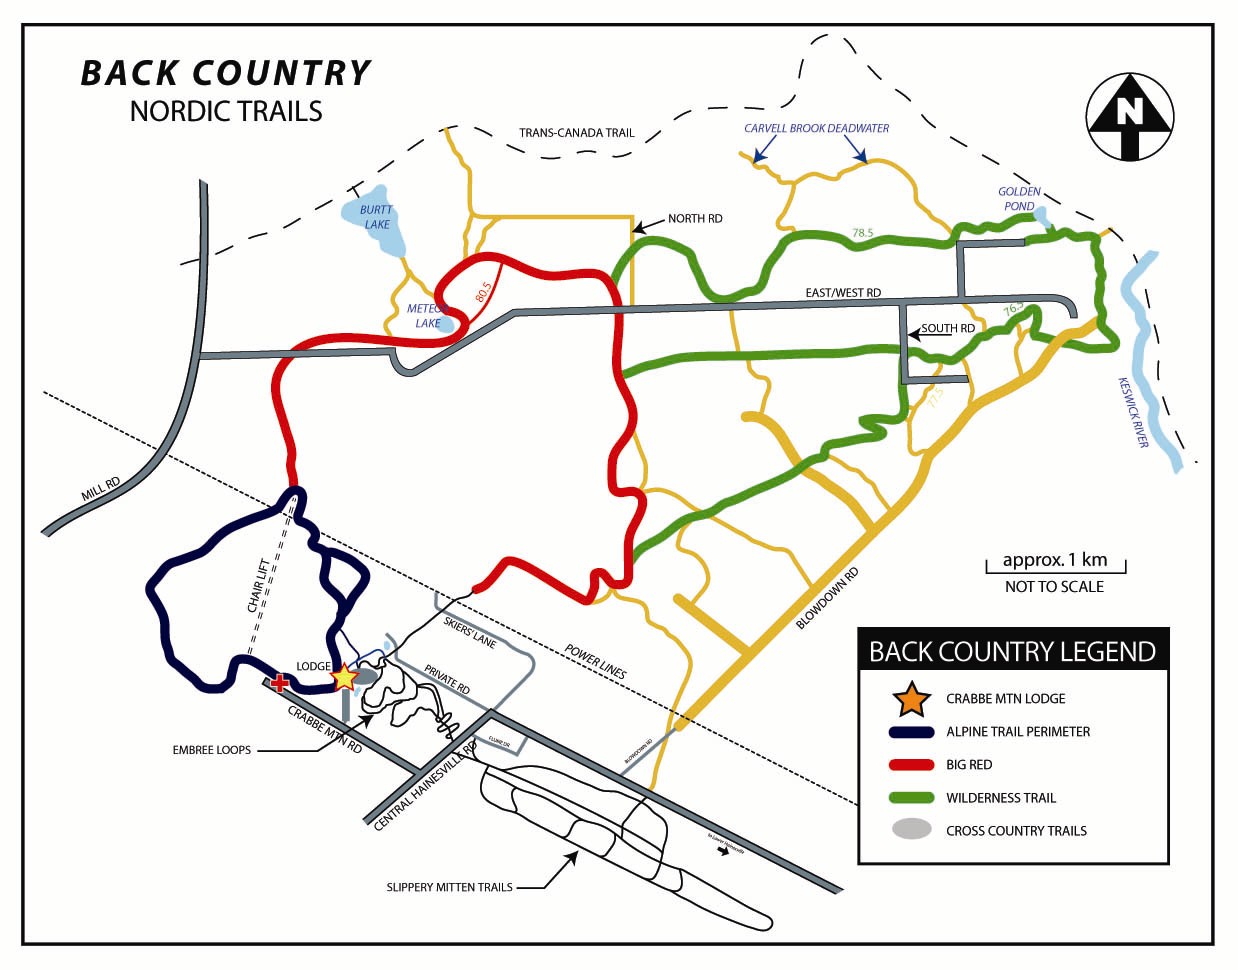 Back country trail map